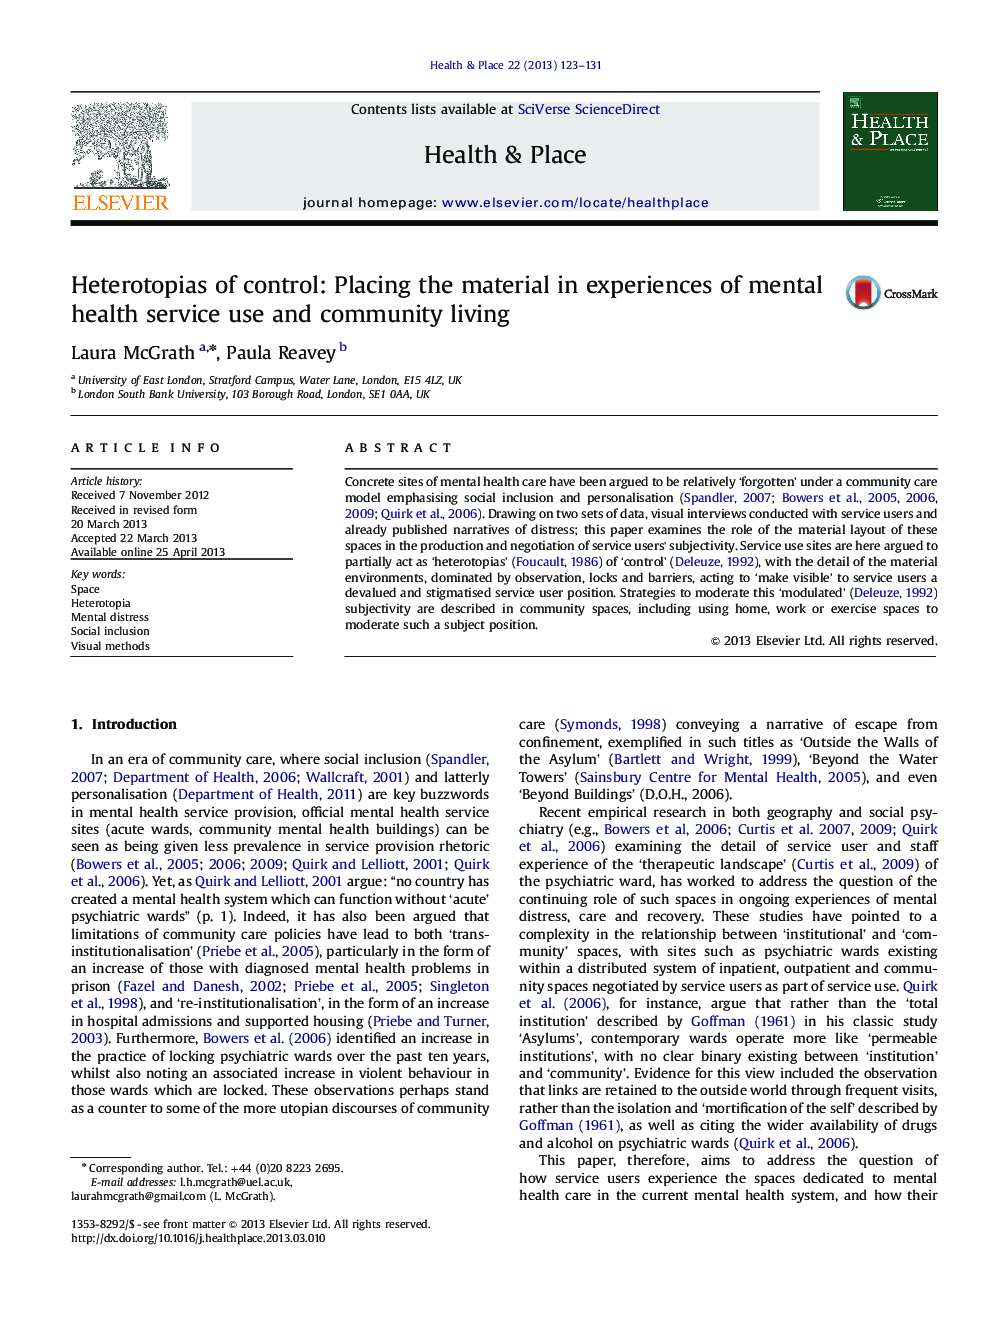 Heterotopias of control: Placing the material in experiences of mental health service use and community living